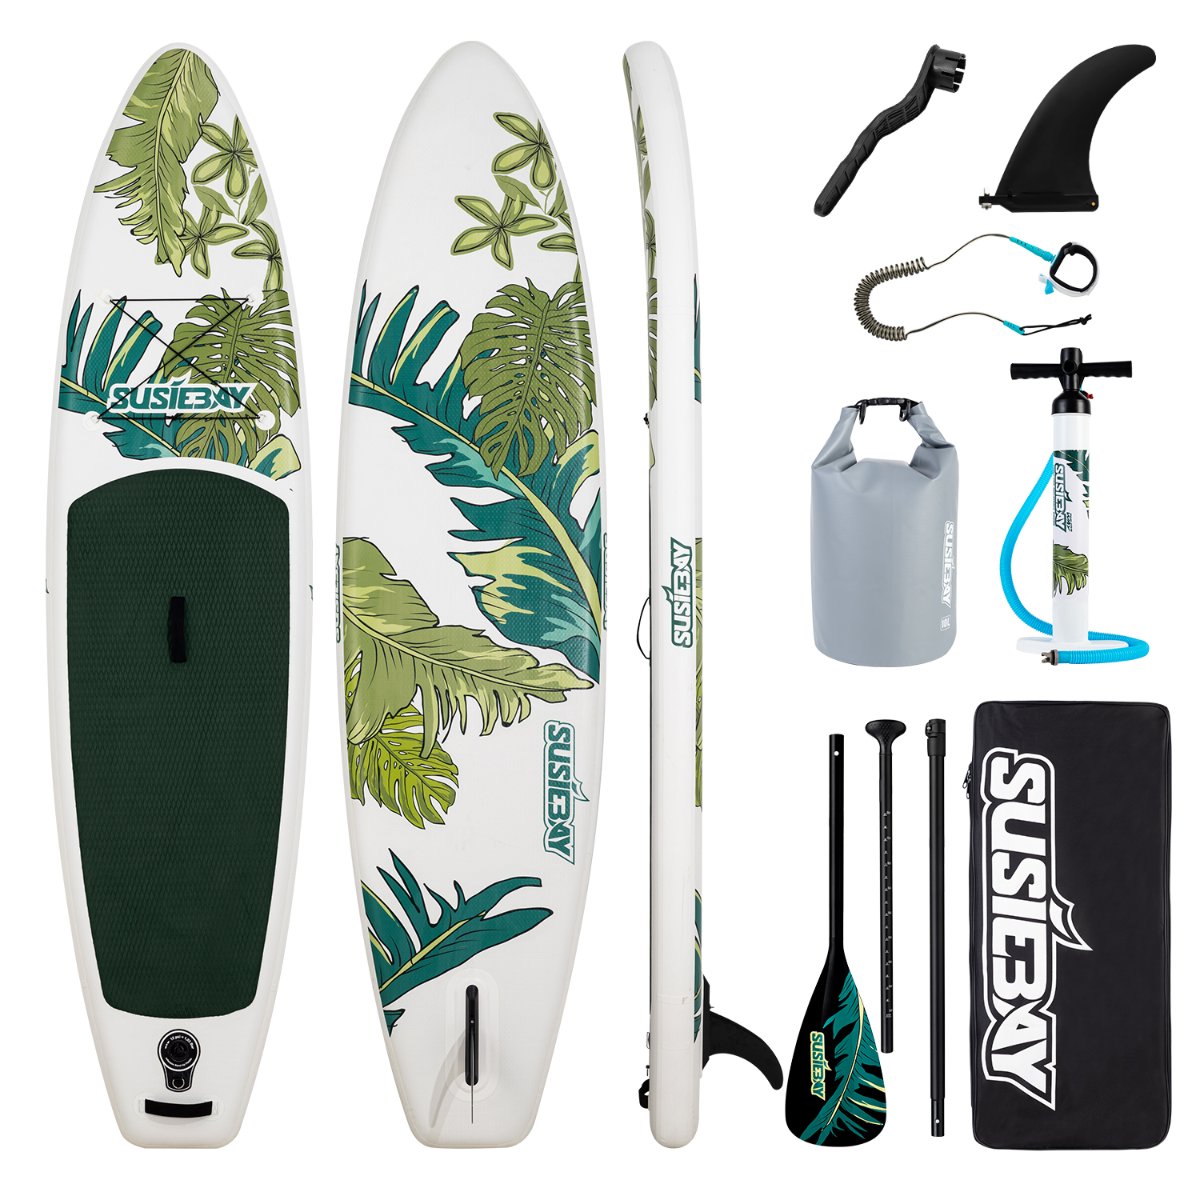 Up Floating Susiebay Paddle Board, Paddle Inflatable Yoga Board, Stand Paddle Board